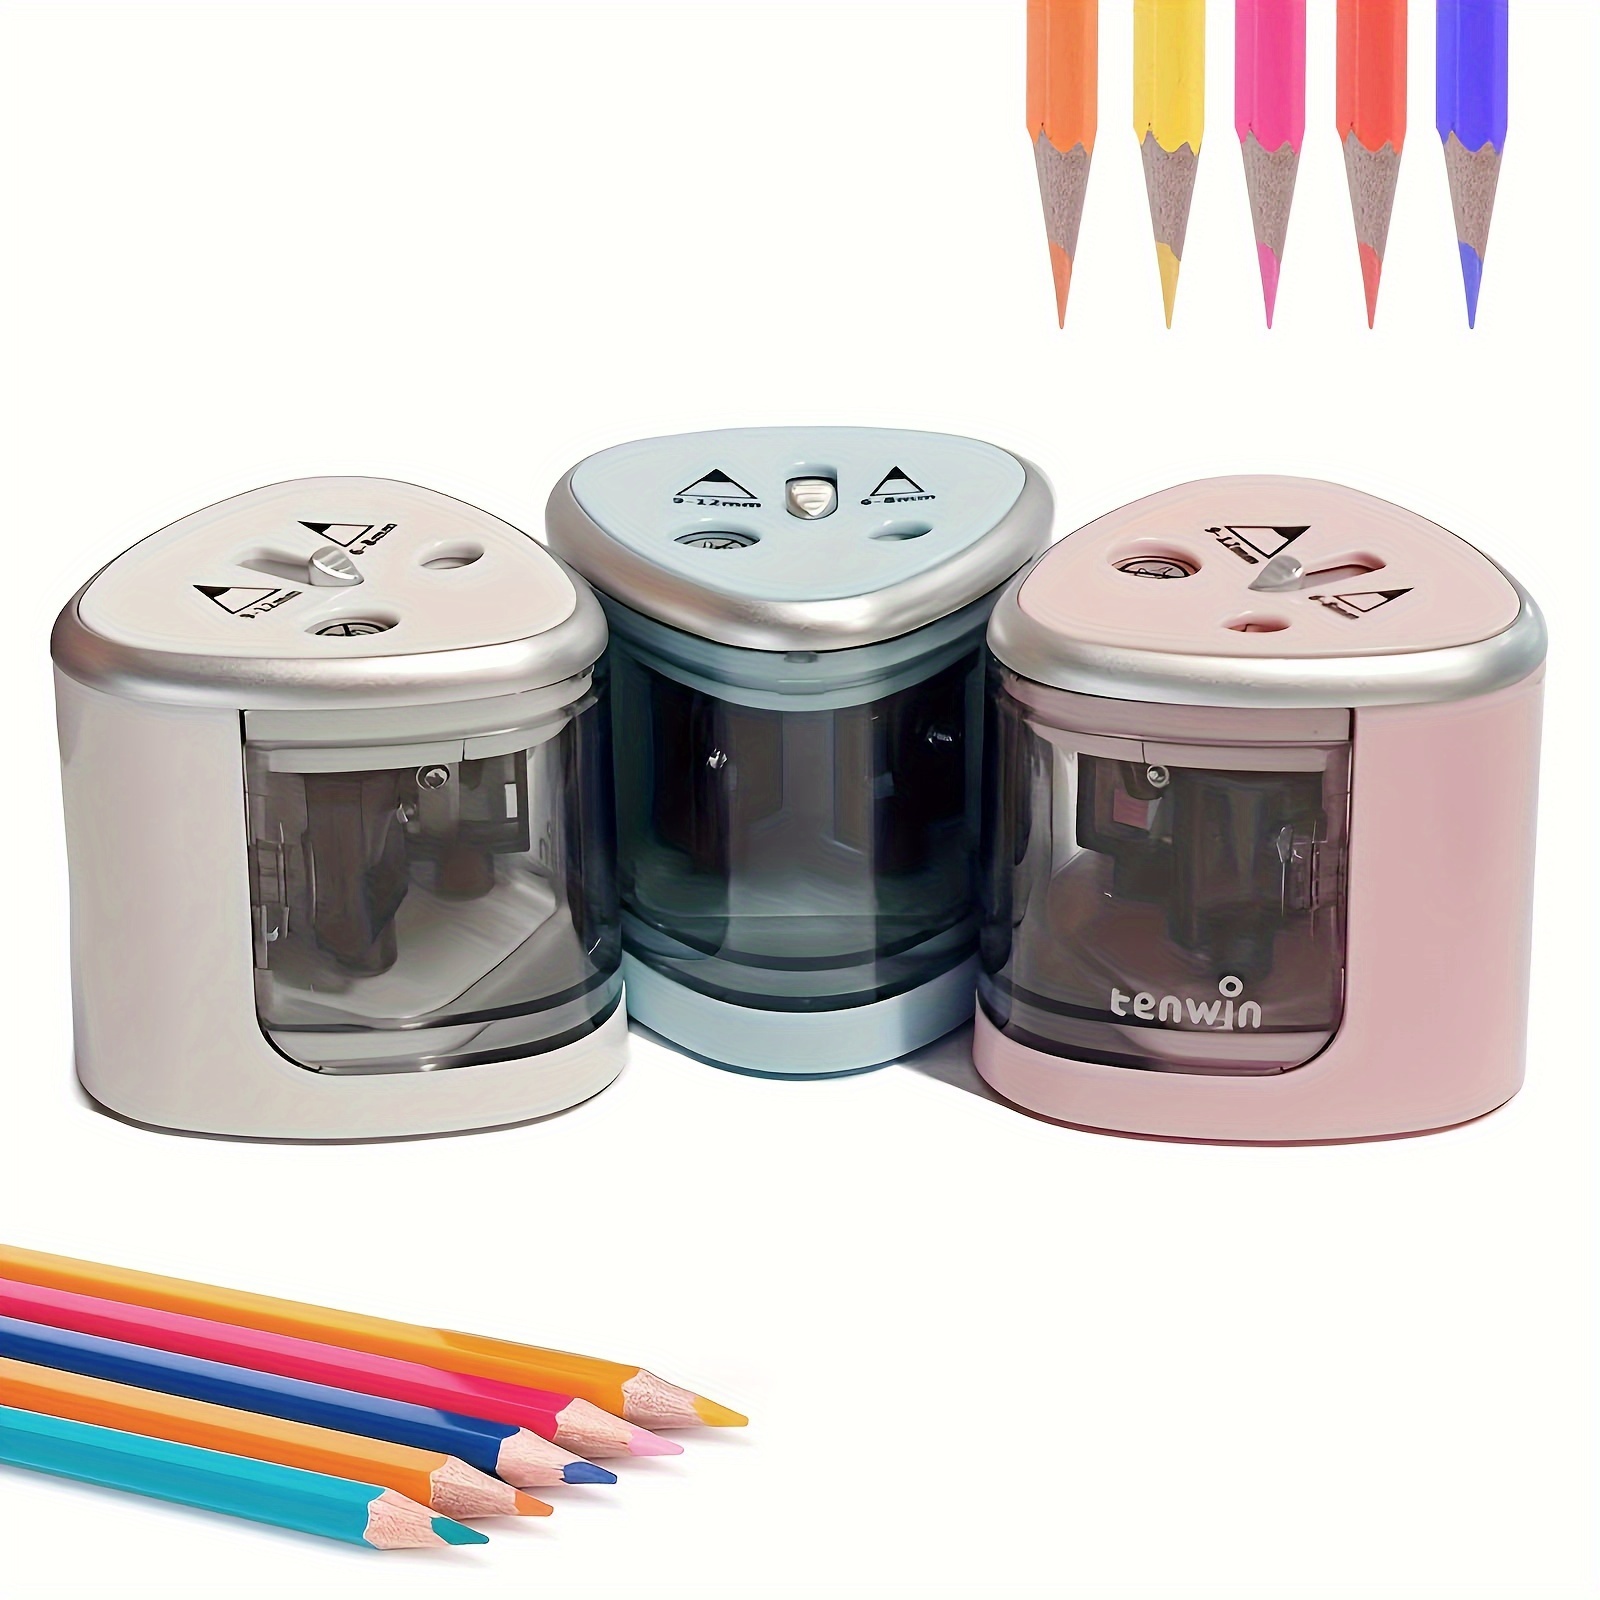 

Electric Pencil Sharpener Thick And Thin Double Hole Semi-automatic Pencil Sharpening Machine Strong Power 2 Hole Pencil Converter